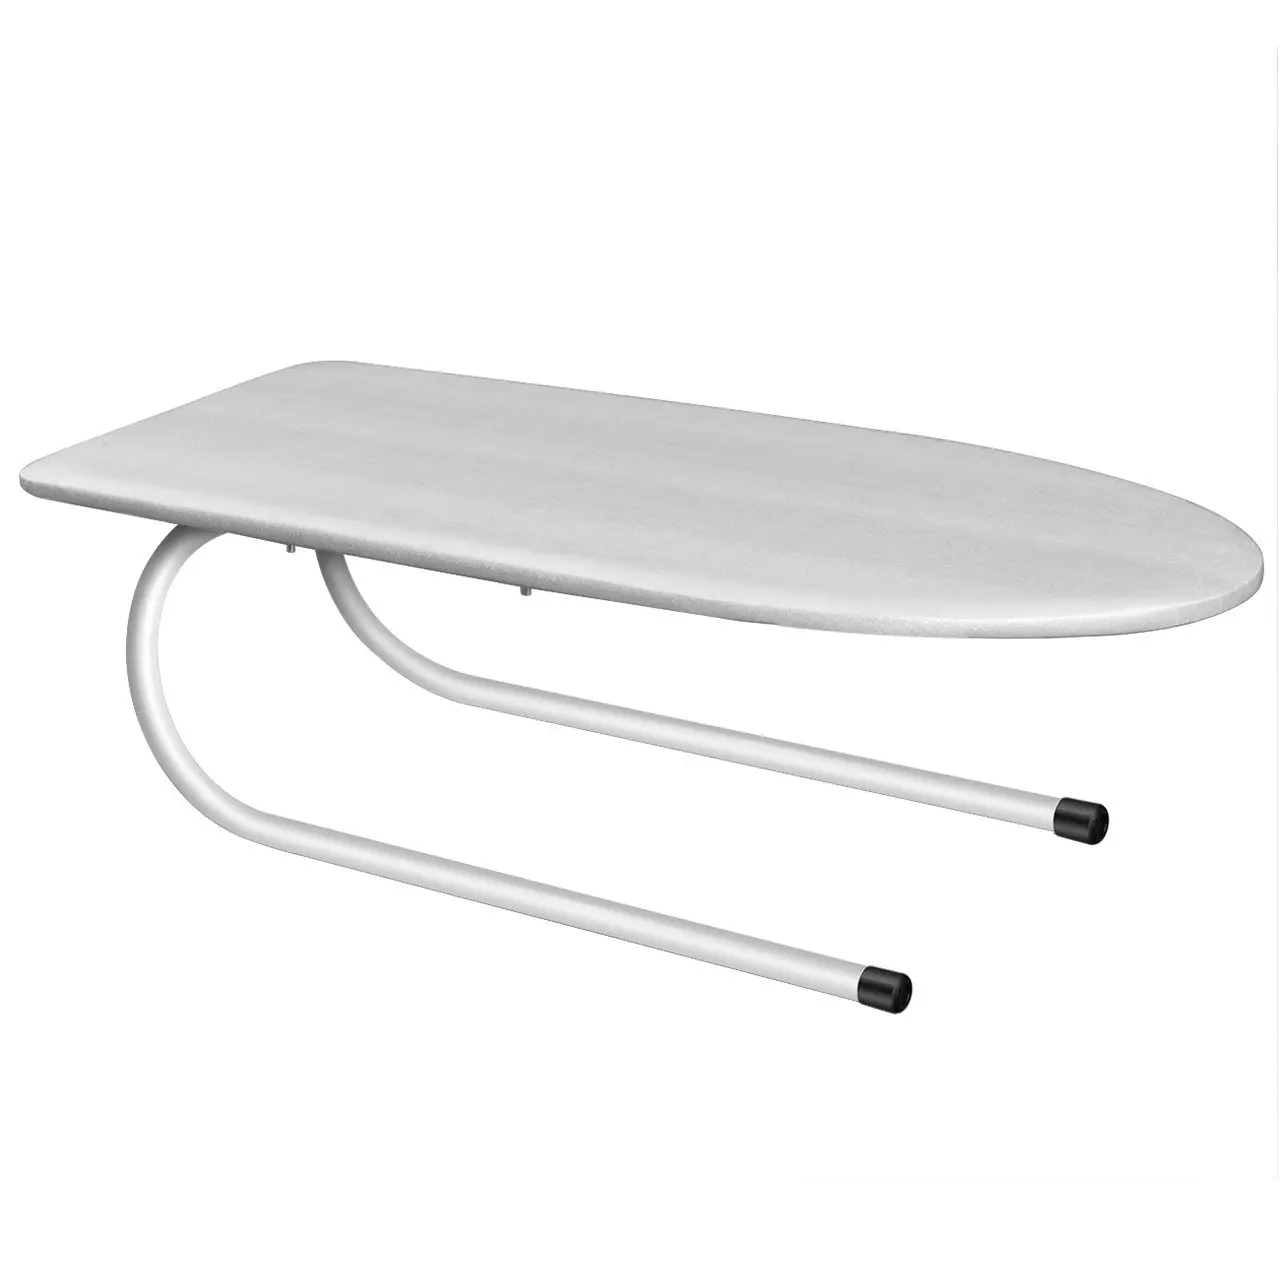 Details about   Ironing Board Home Travel Portable Sleeve Cuffs Mini Table With Folding Legs 